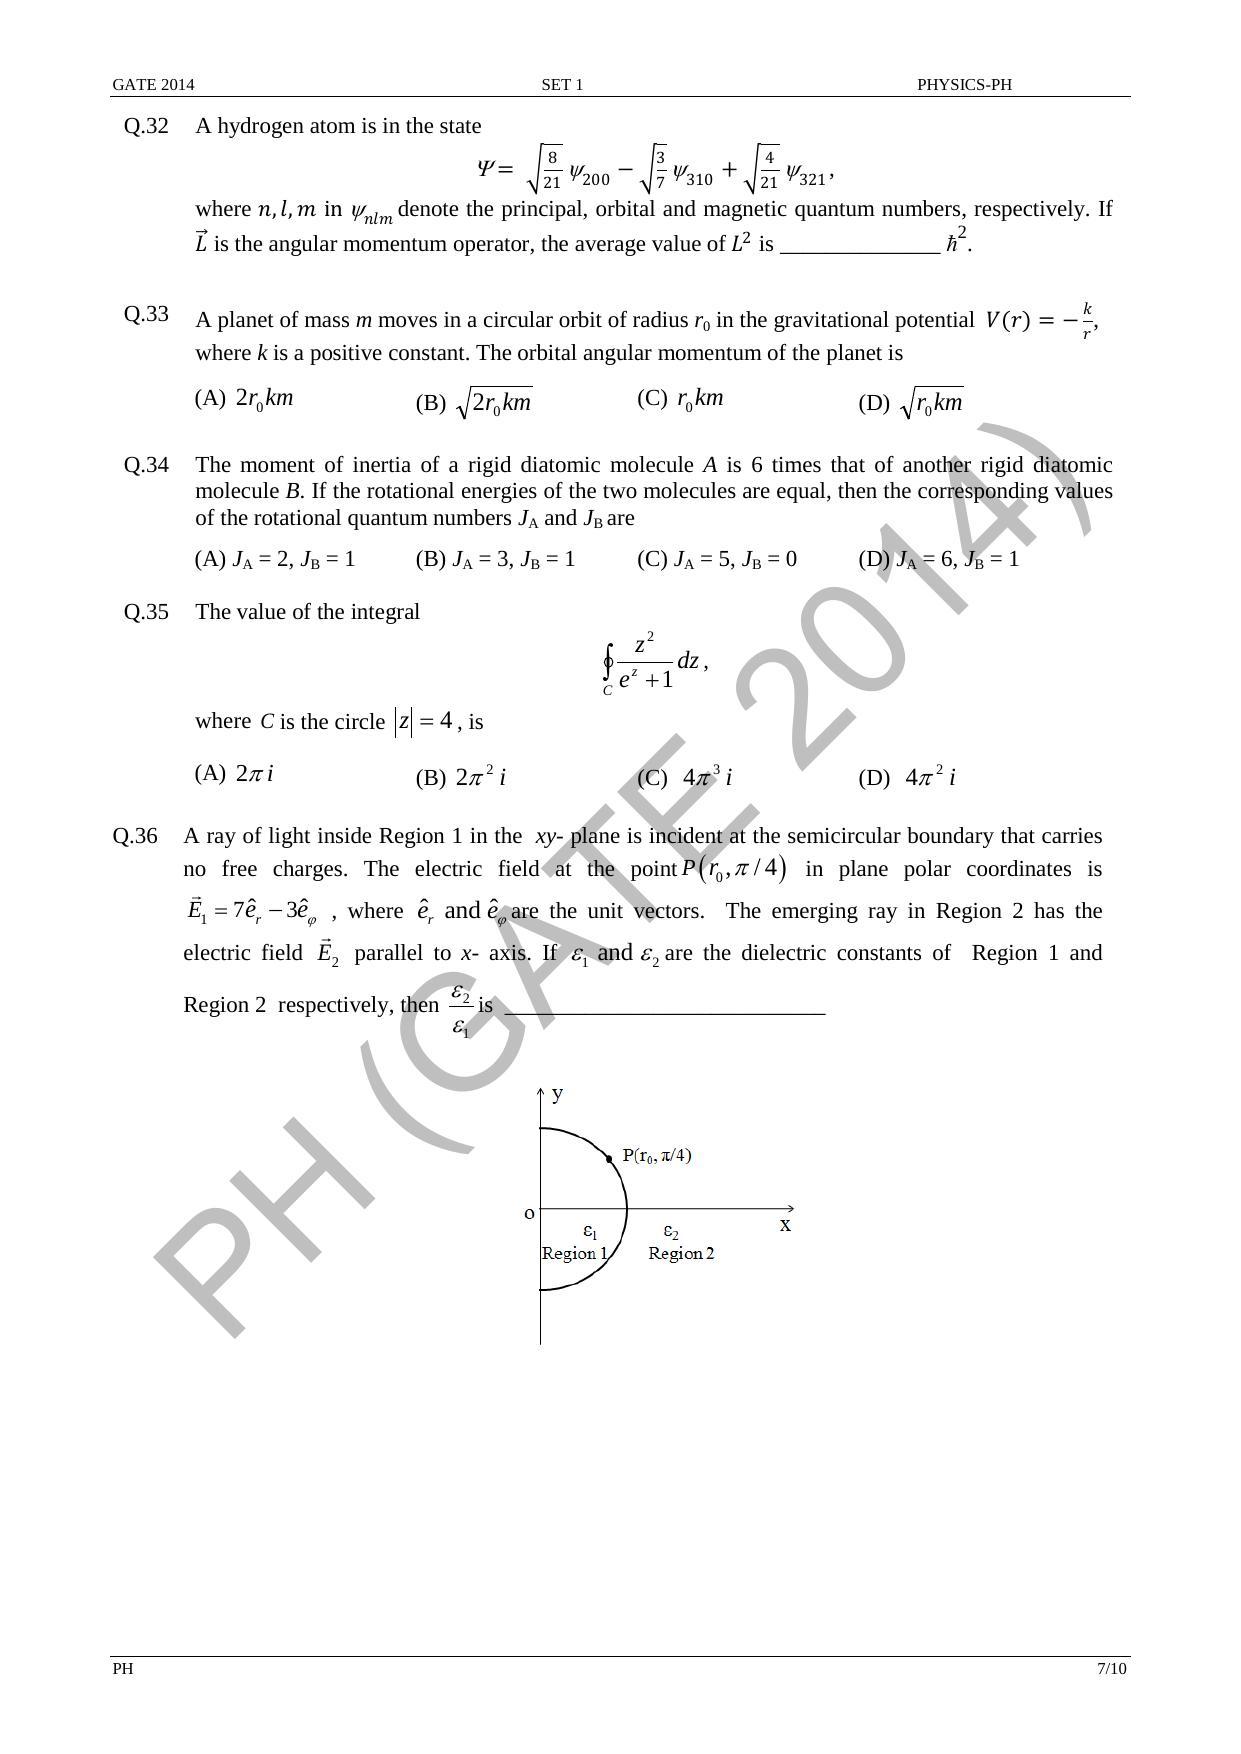 GATE 2014 Physics (PH) Question Paper with Answer Key - Page 14